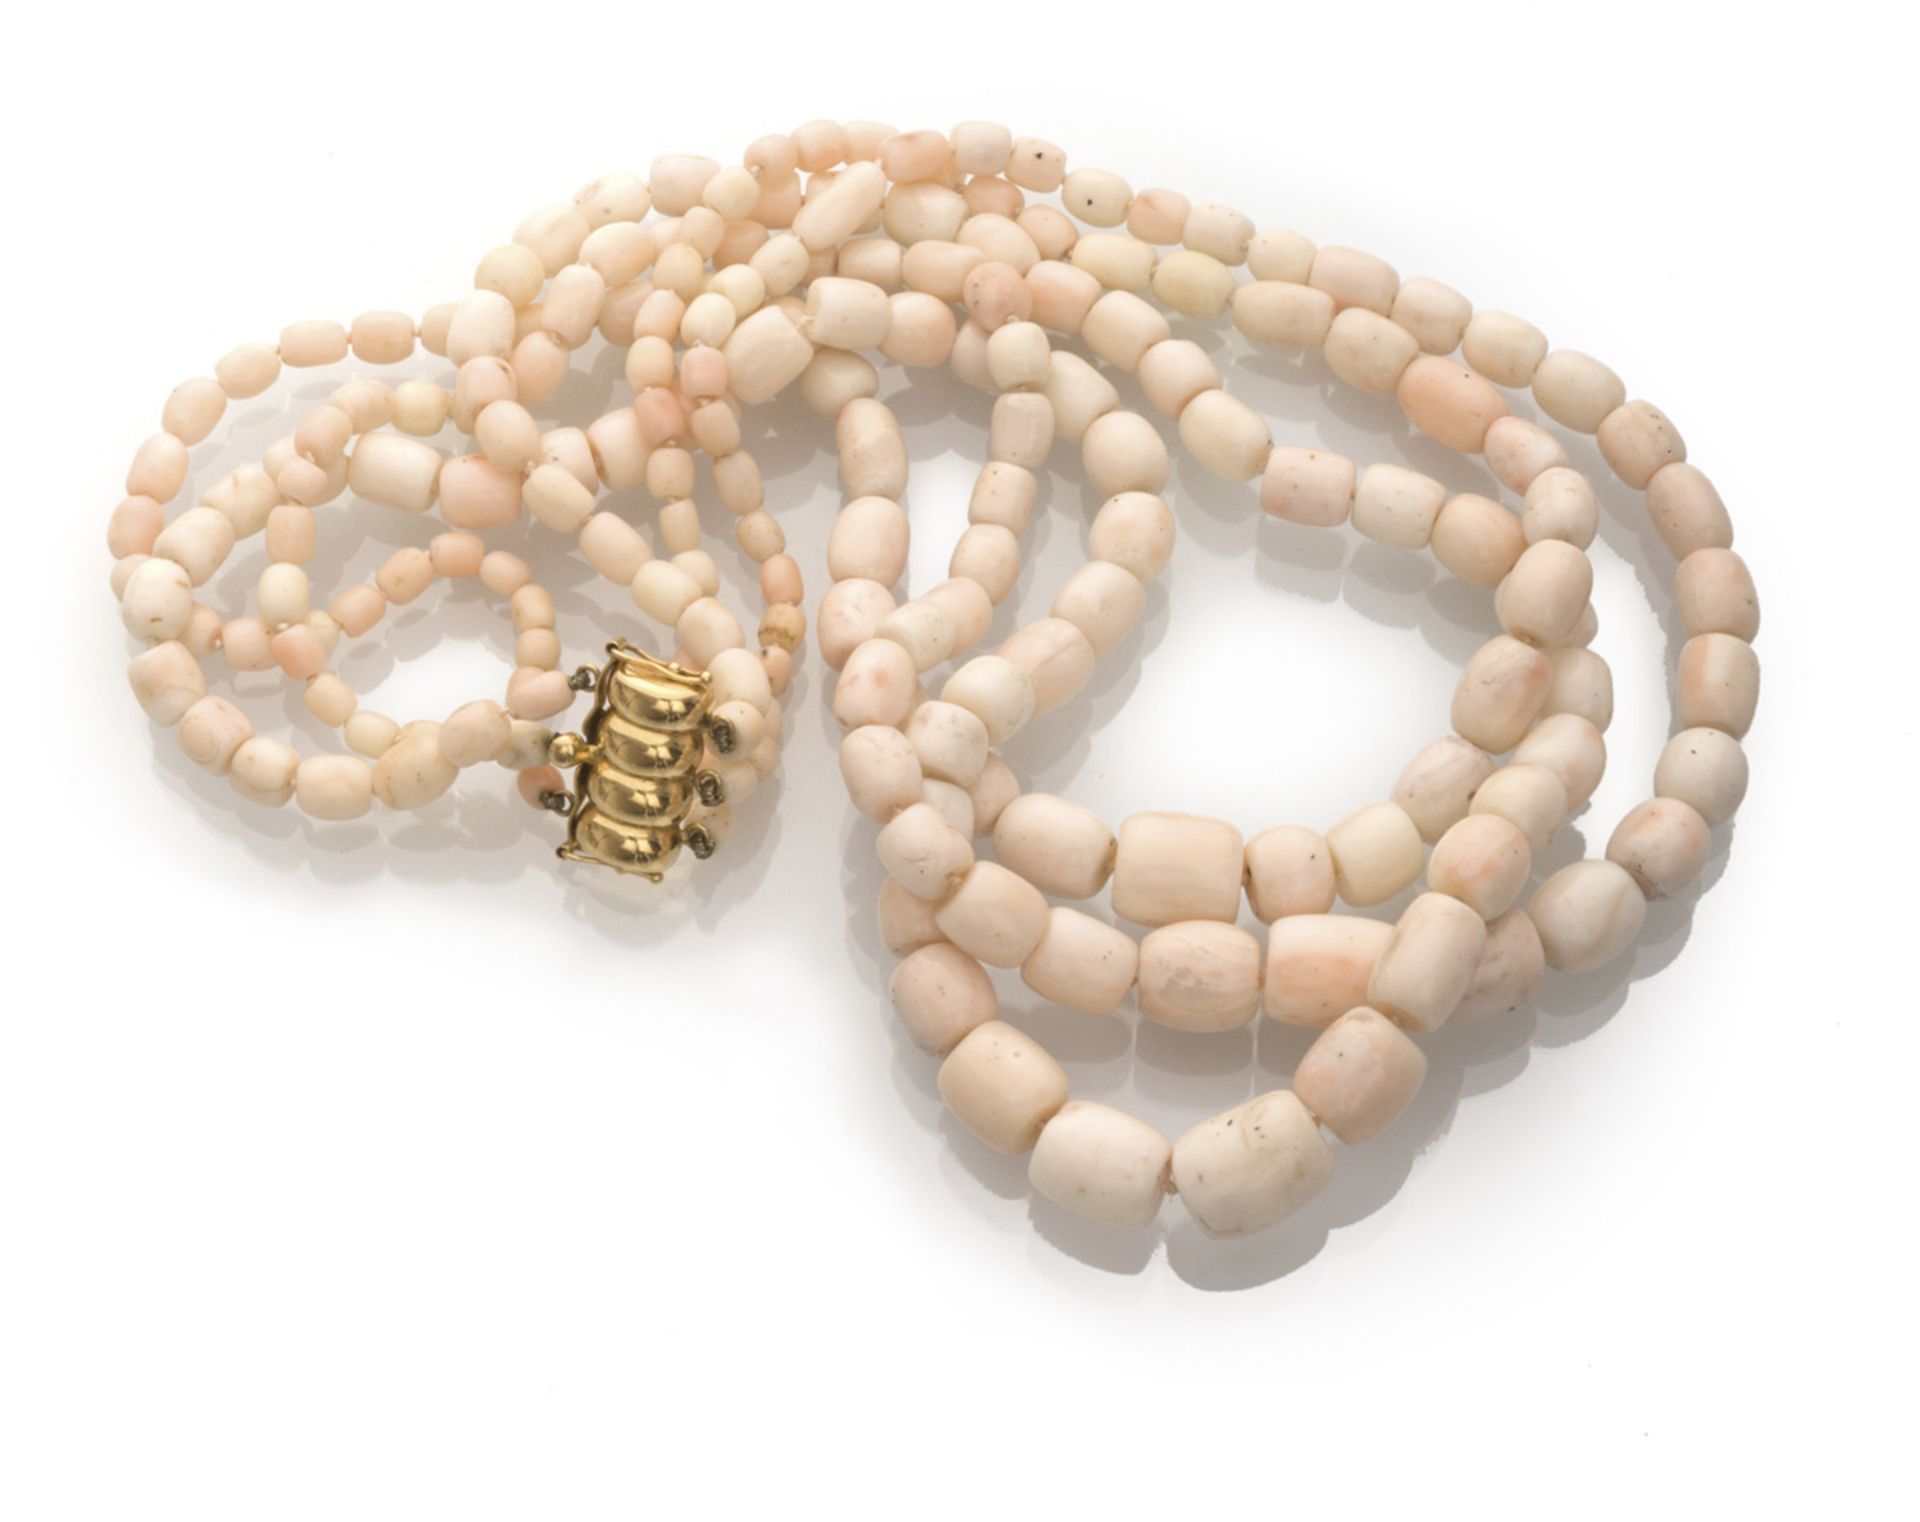 ATTRACTIVE NECKLACE three threads of white coral in pink tones consisting of scaled elements.